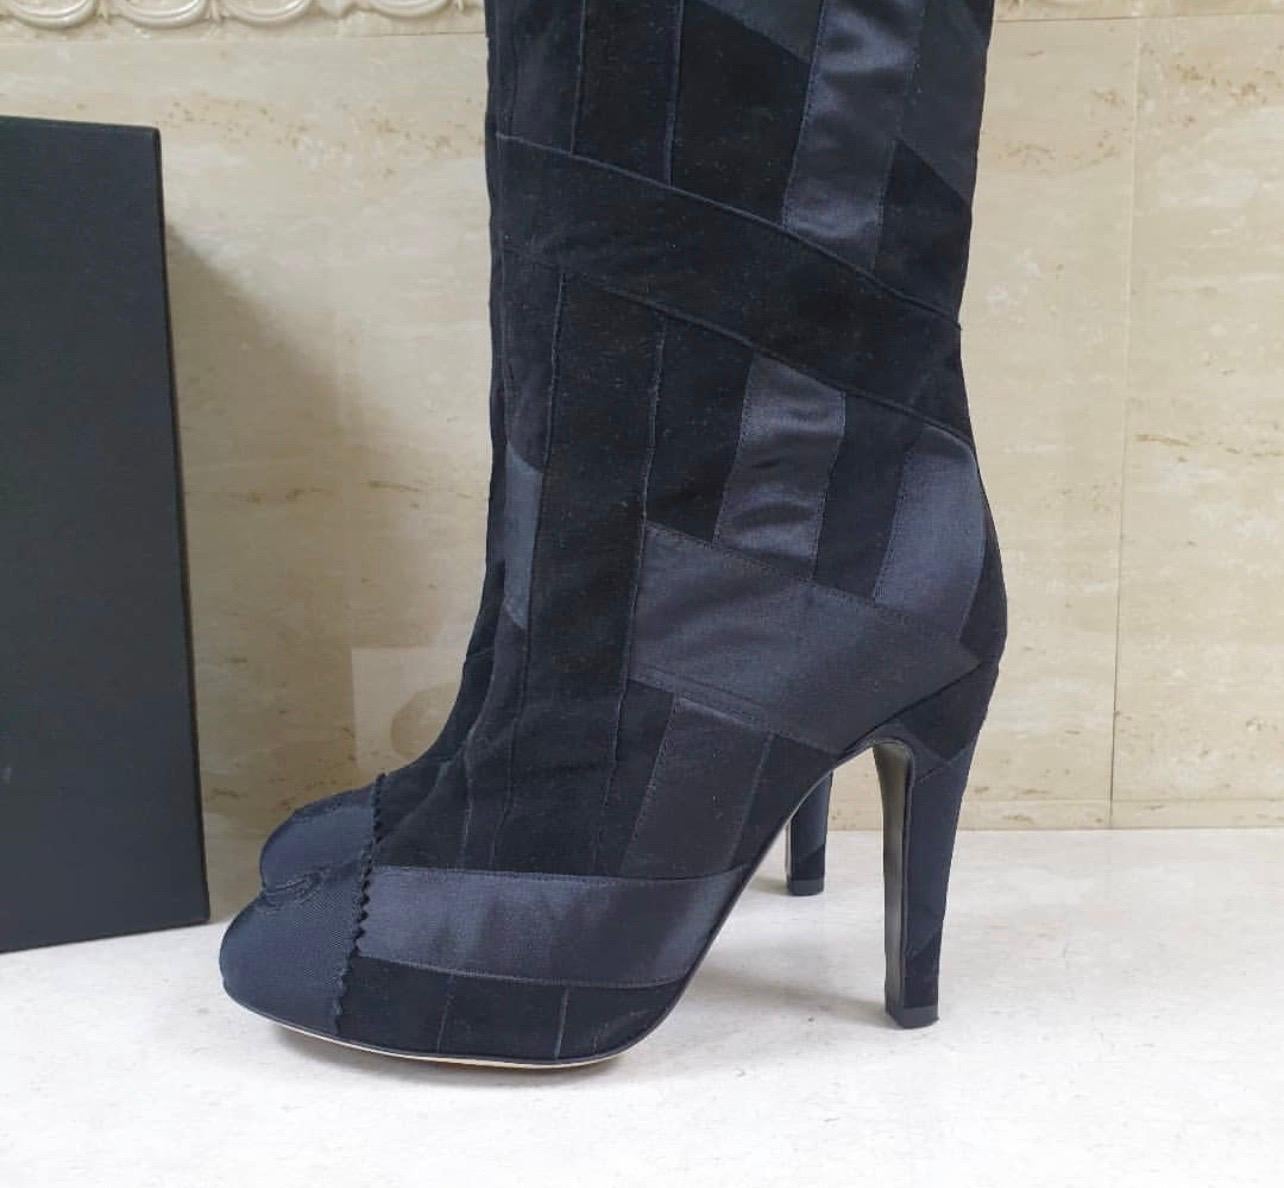 Chanel Black Suede Textile Heeled  Overknee Boots
CC Logo Toes
sz.38
Very good condition.
No original packaging.